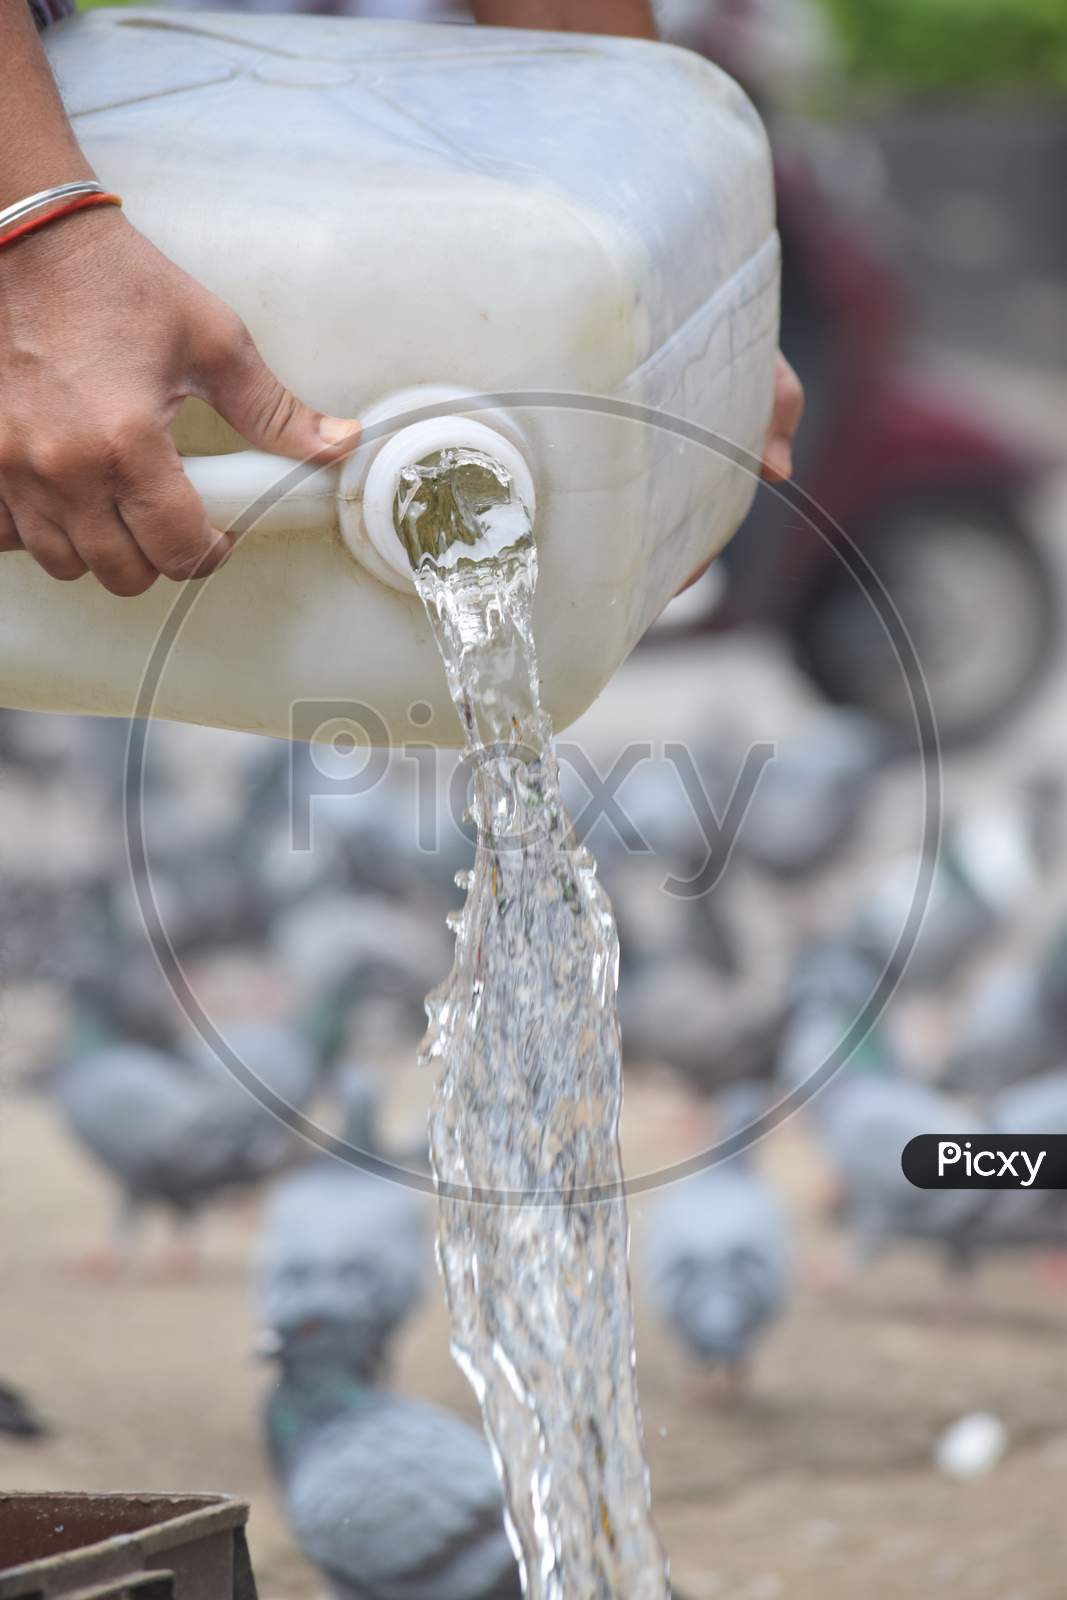 Hyderabad, Telangana, India. july-13-2020: A man is feeding pigeons all around in corona virus pandemic time, peoples caring on birds, wearing mask, drinking water for pigeons